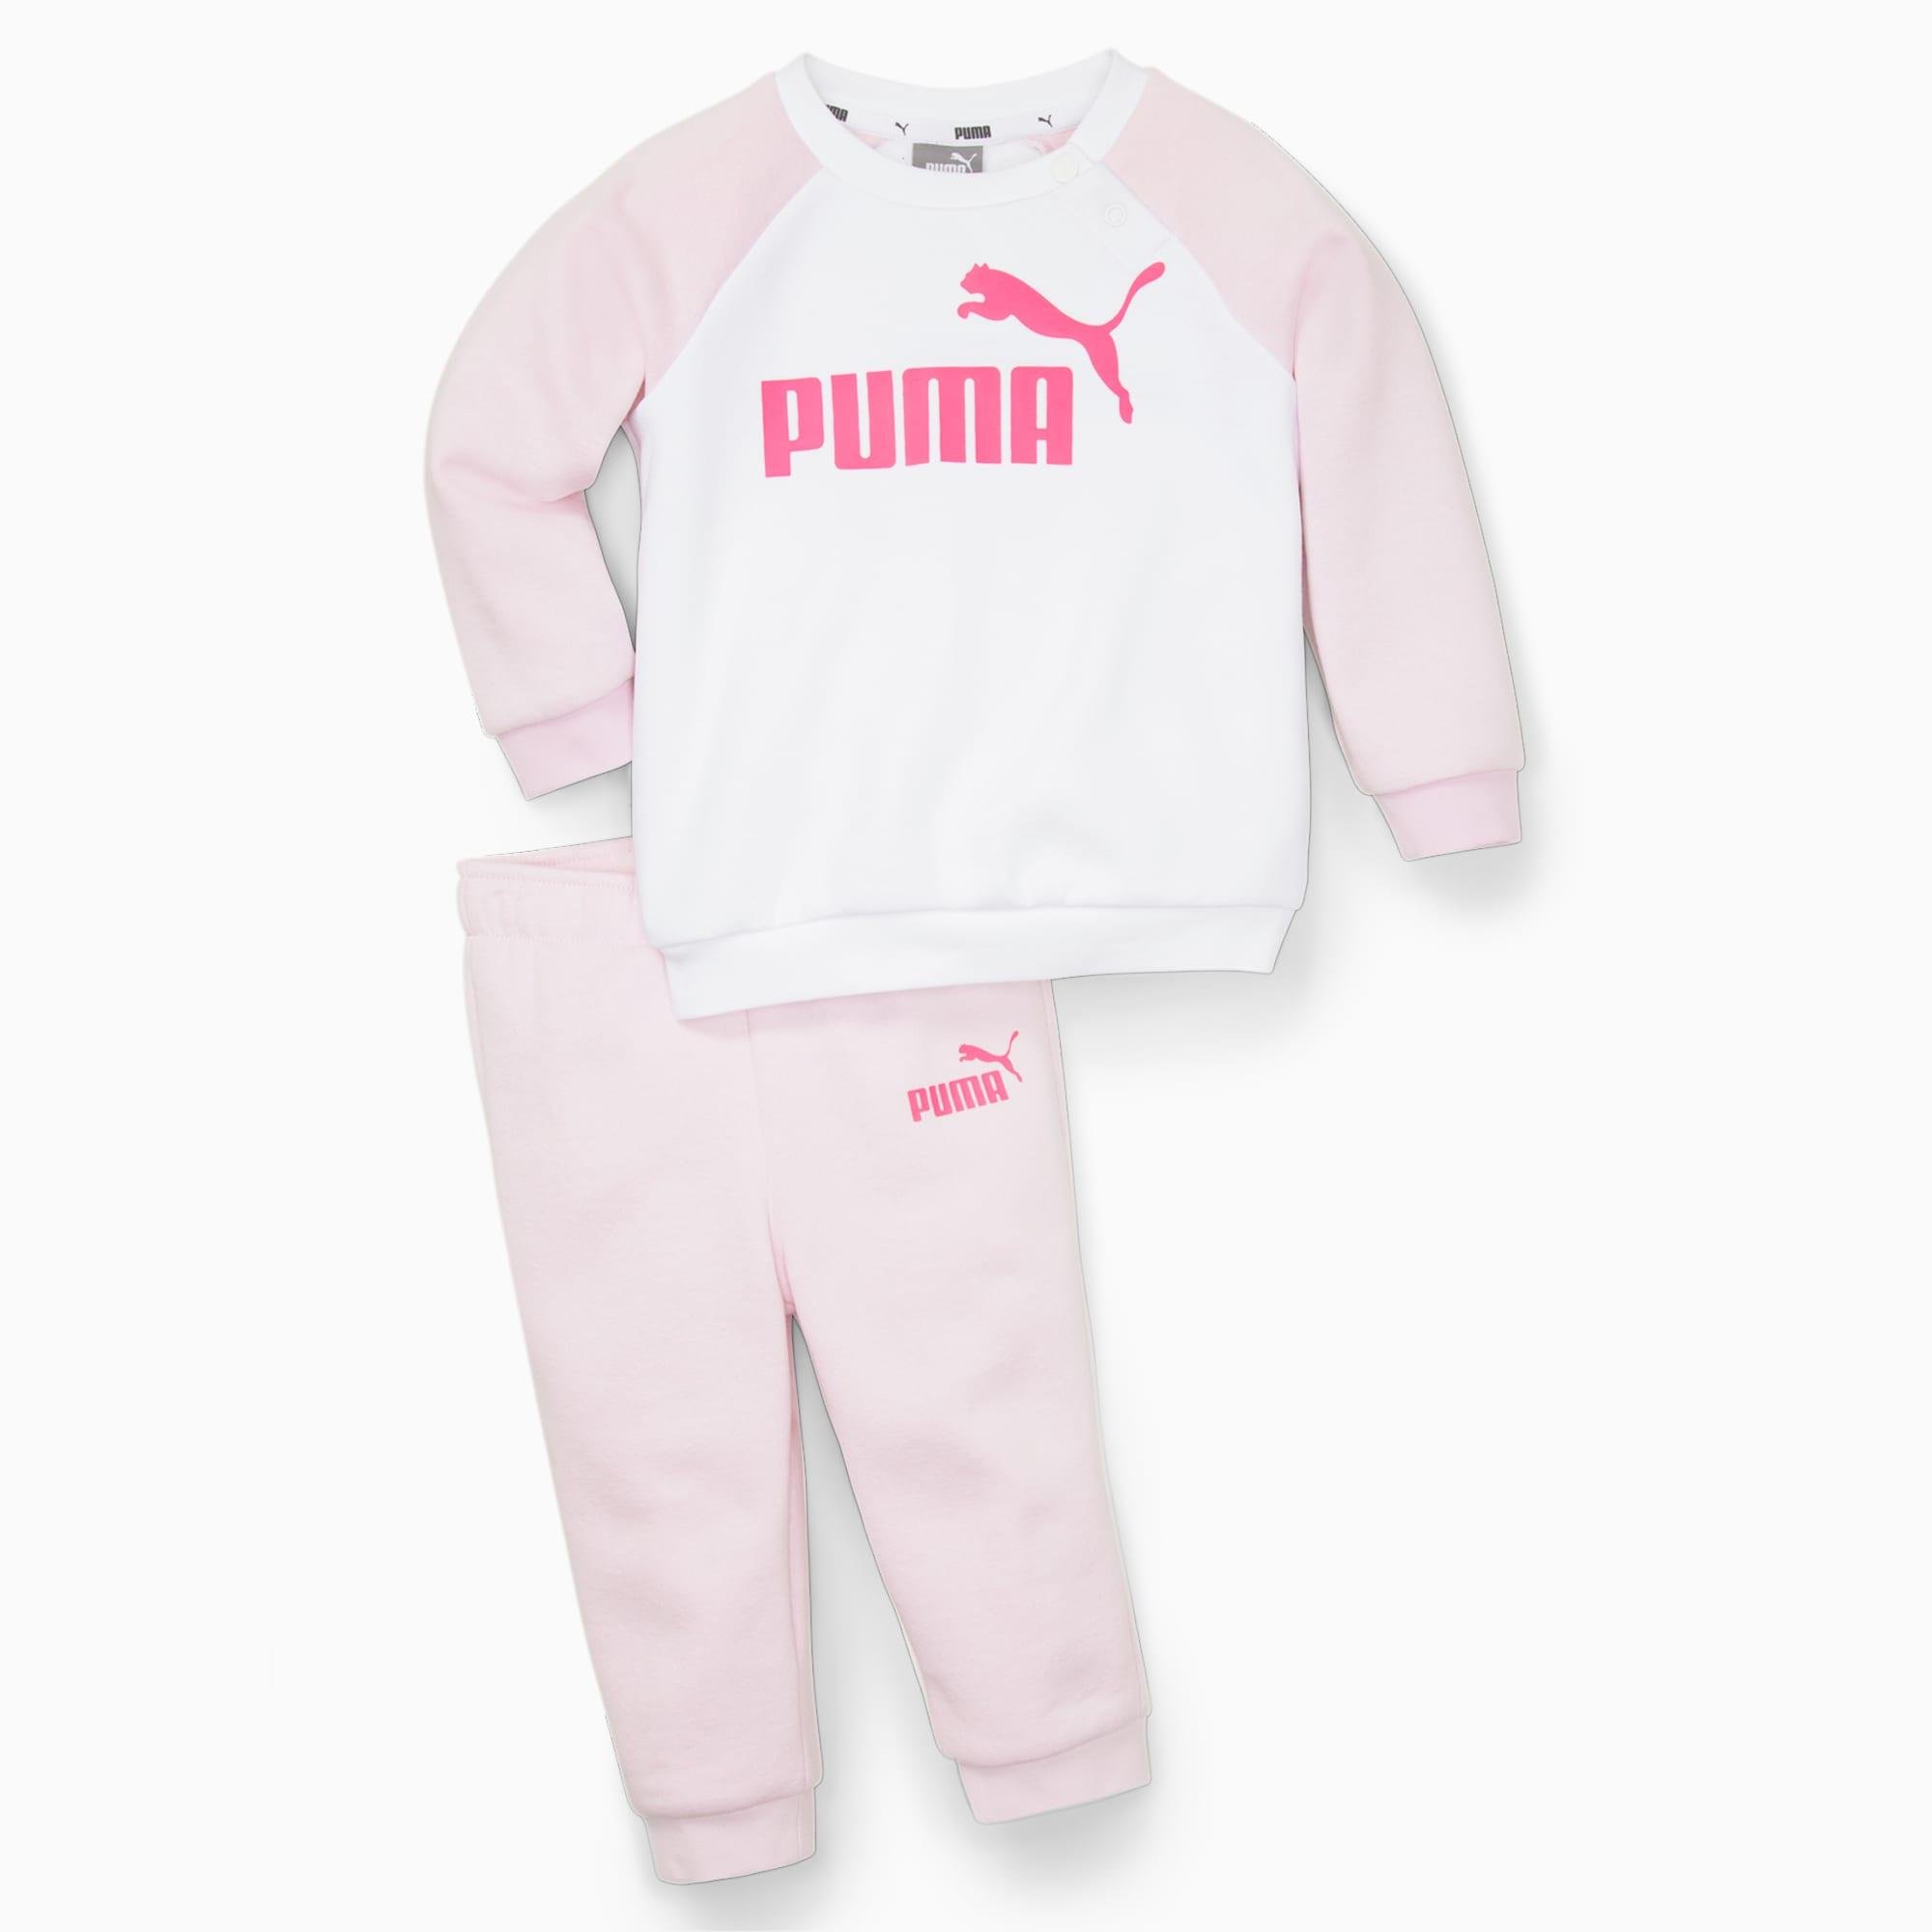 Two-Piece Minicats Essentials Raglan Toddlers' Jogger Set by PUMA